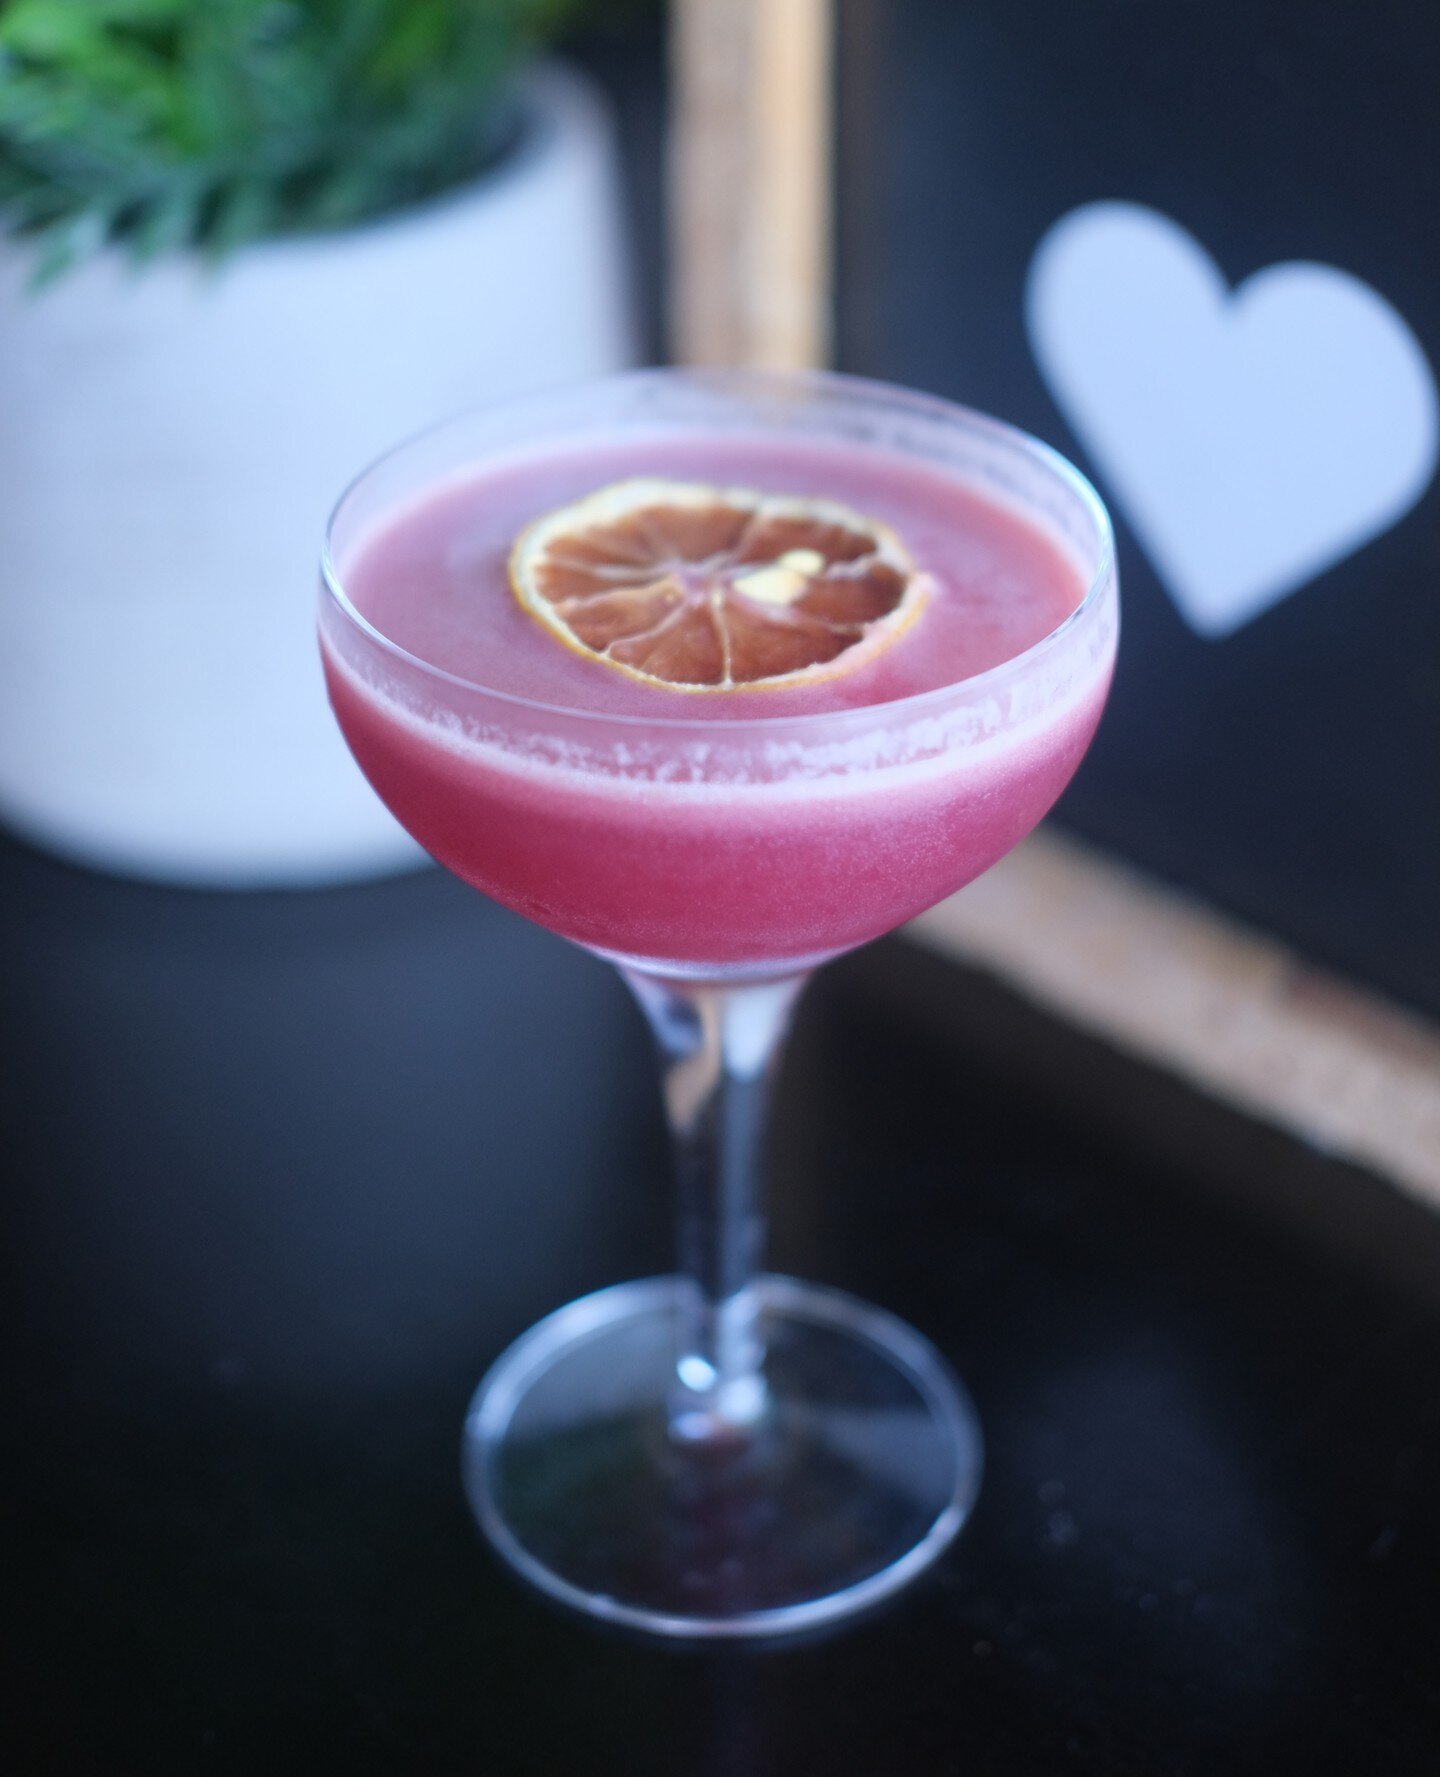 Brighten up your weekend with our Pop of Pink cocktail special! 💖⁠
Pink Gin, Lemon Juice, Raspberry, Coconut and Orange Juice. Available Friday, Saturday and Sunday at Box Burger. ⁠
⁠
#boxburger #boxburgerbray #bray #brayseafront #borningbray #cockt